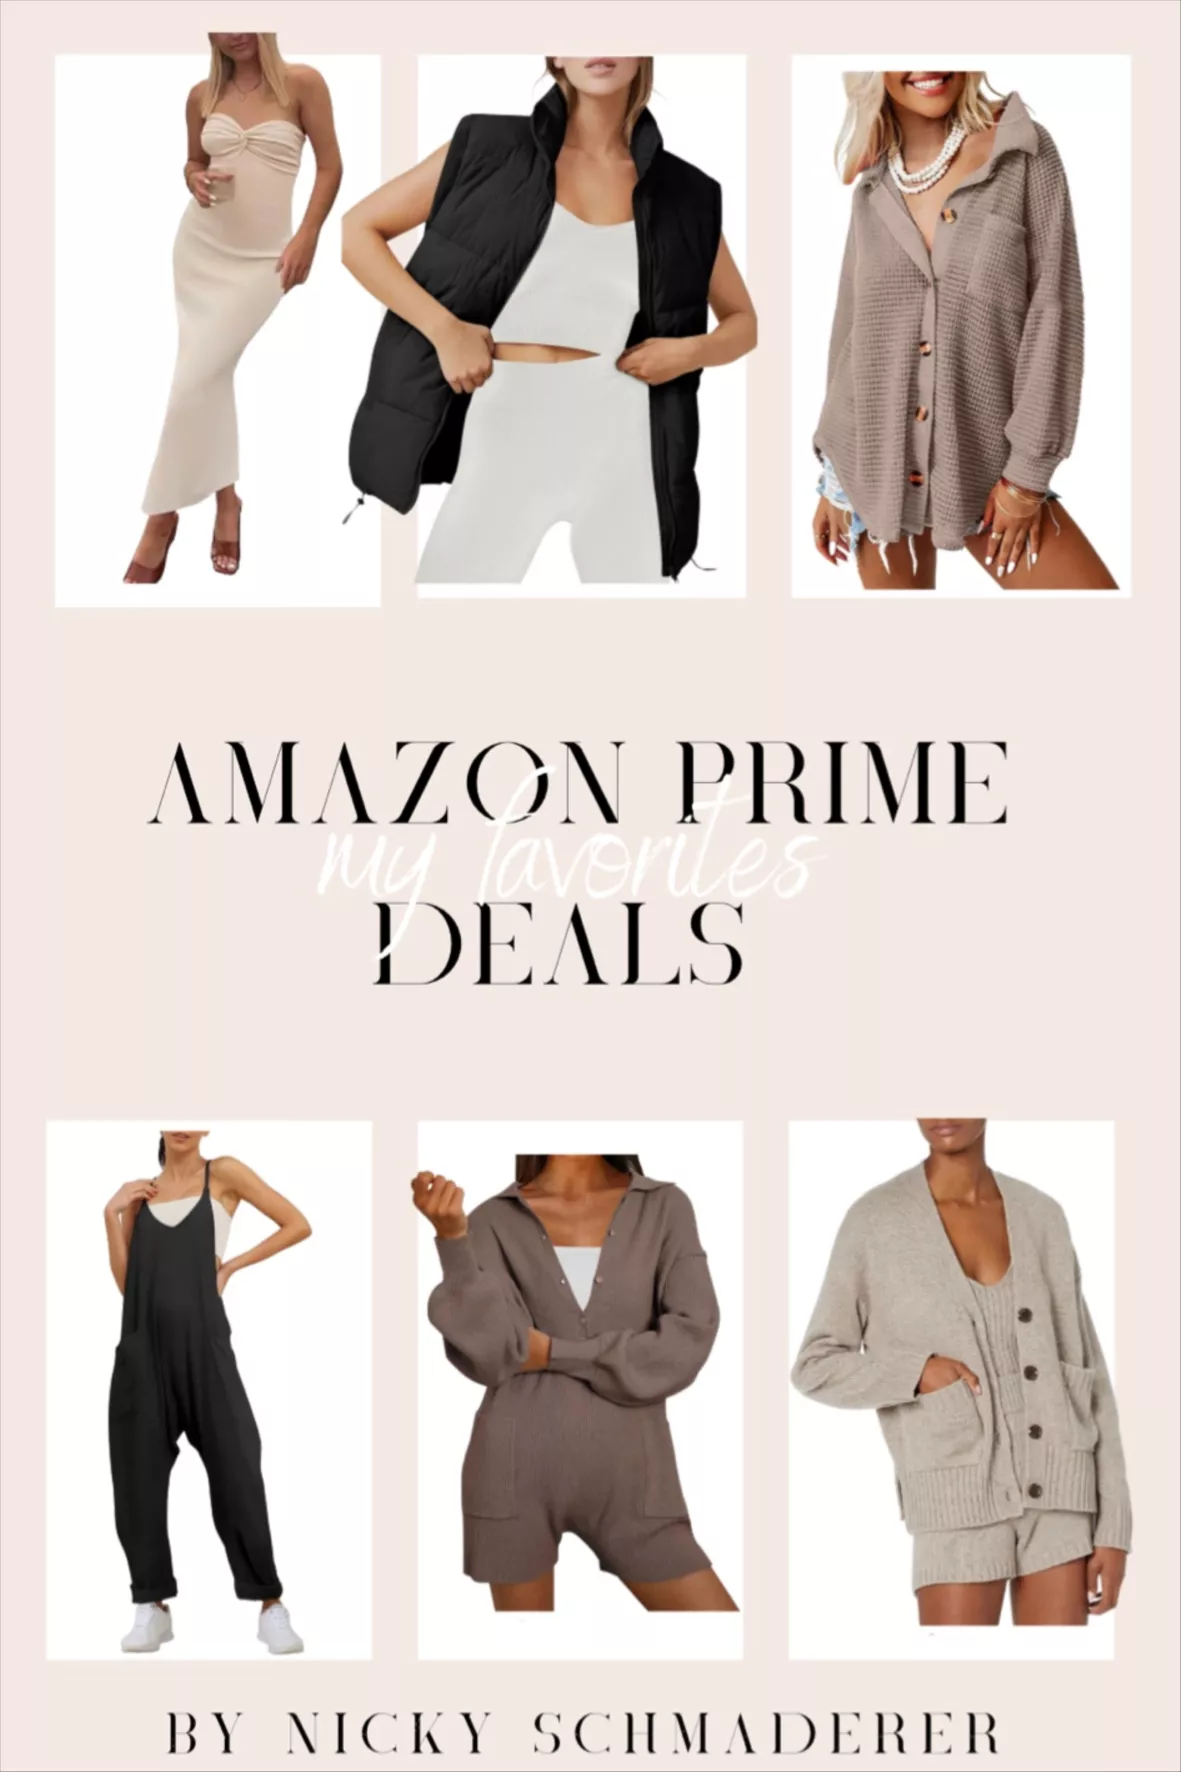 Prime Day: Favorite Fall Fashion Finds On Sale! 